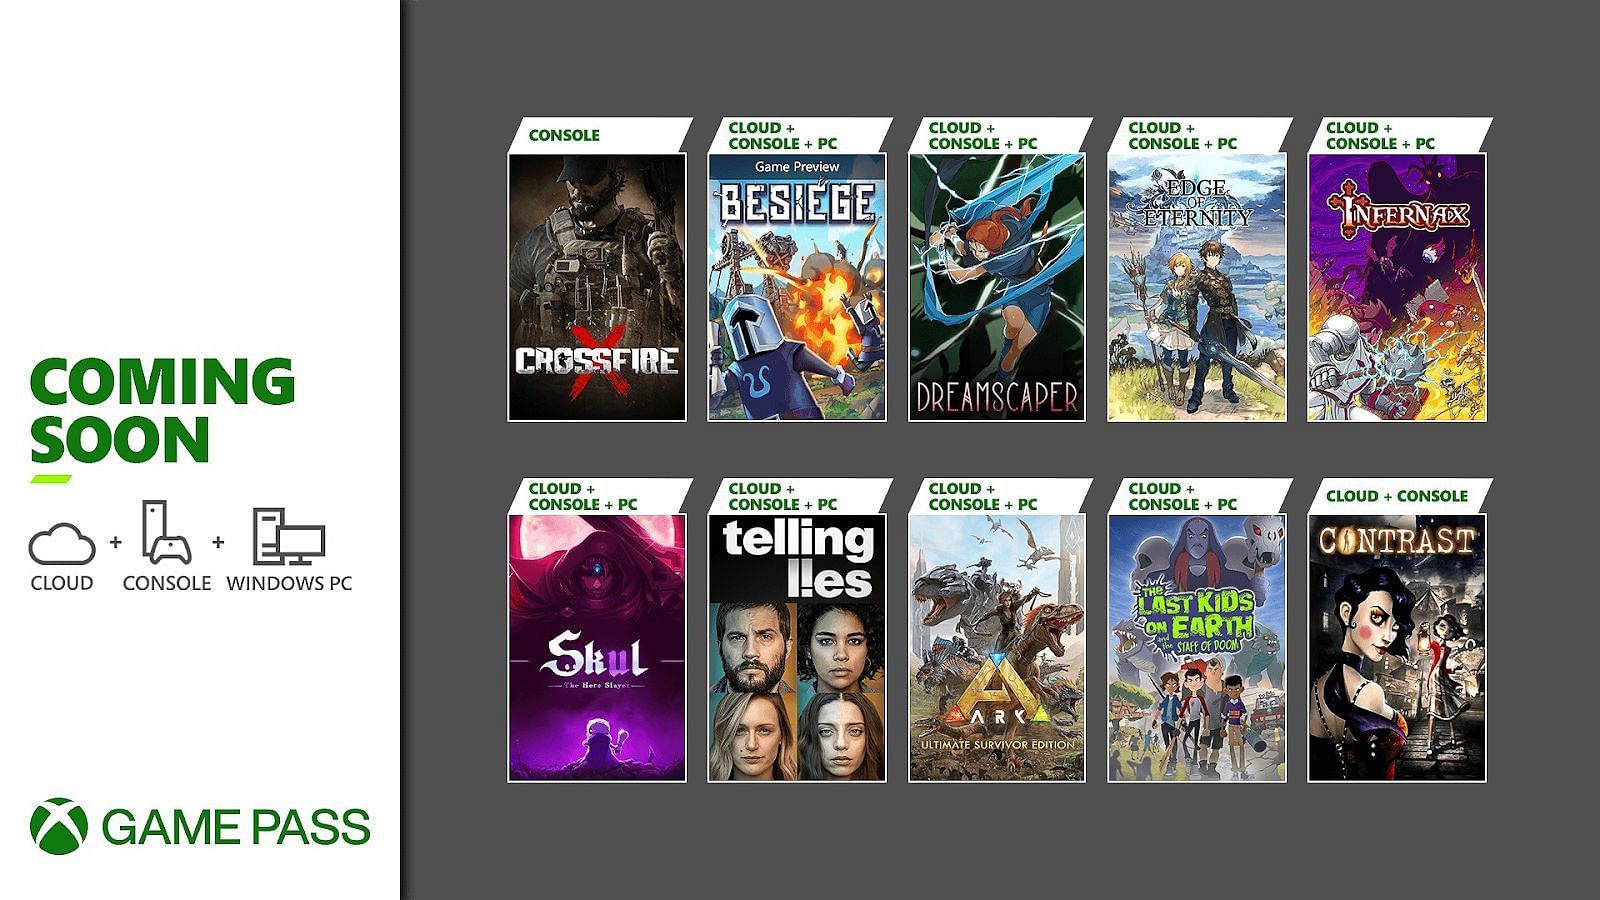 Games coming to Game Pass (Image by Xbox)